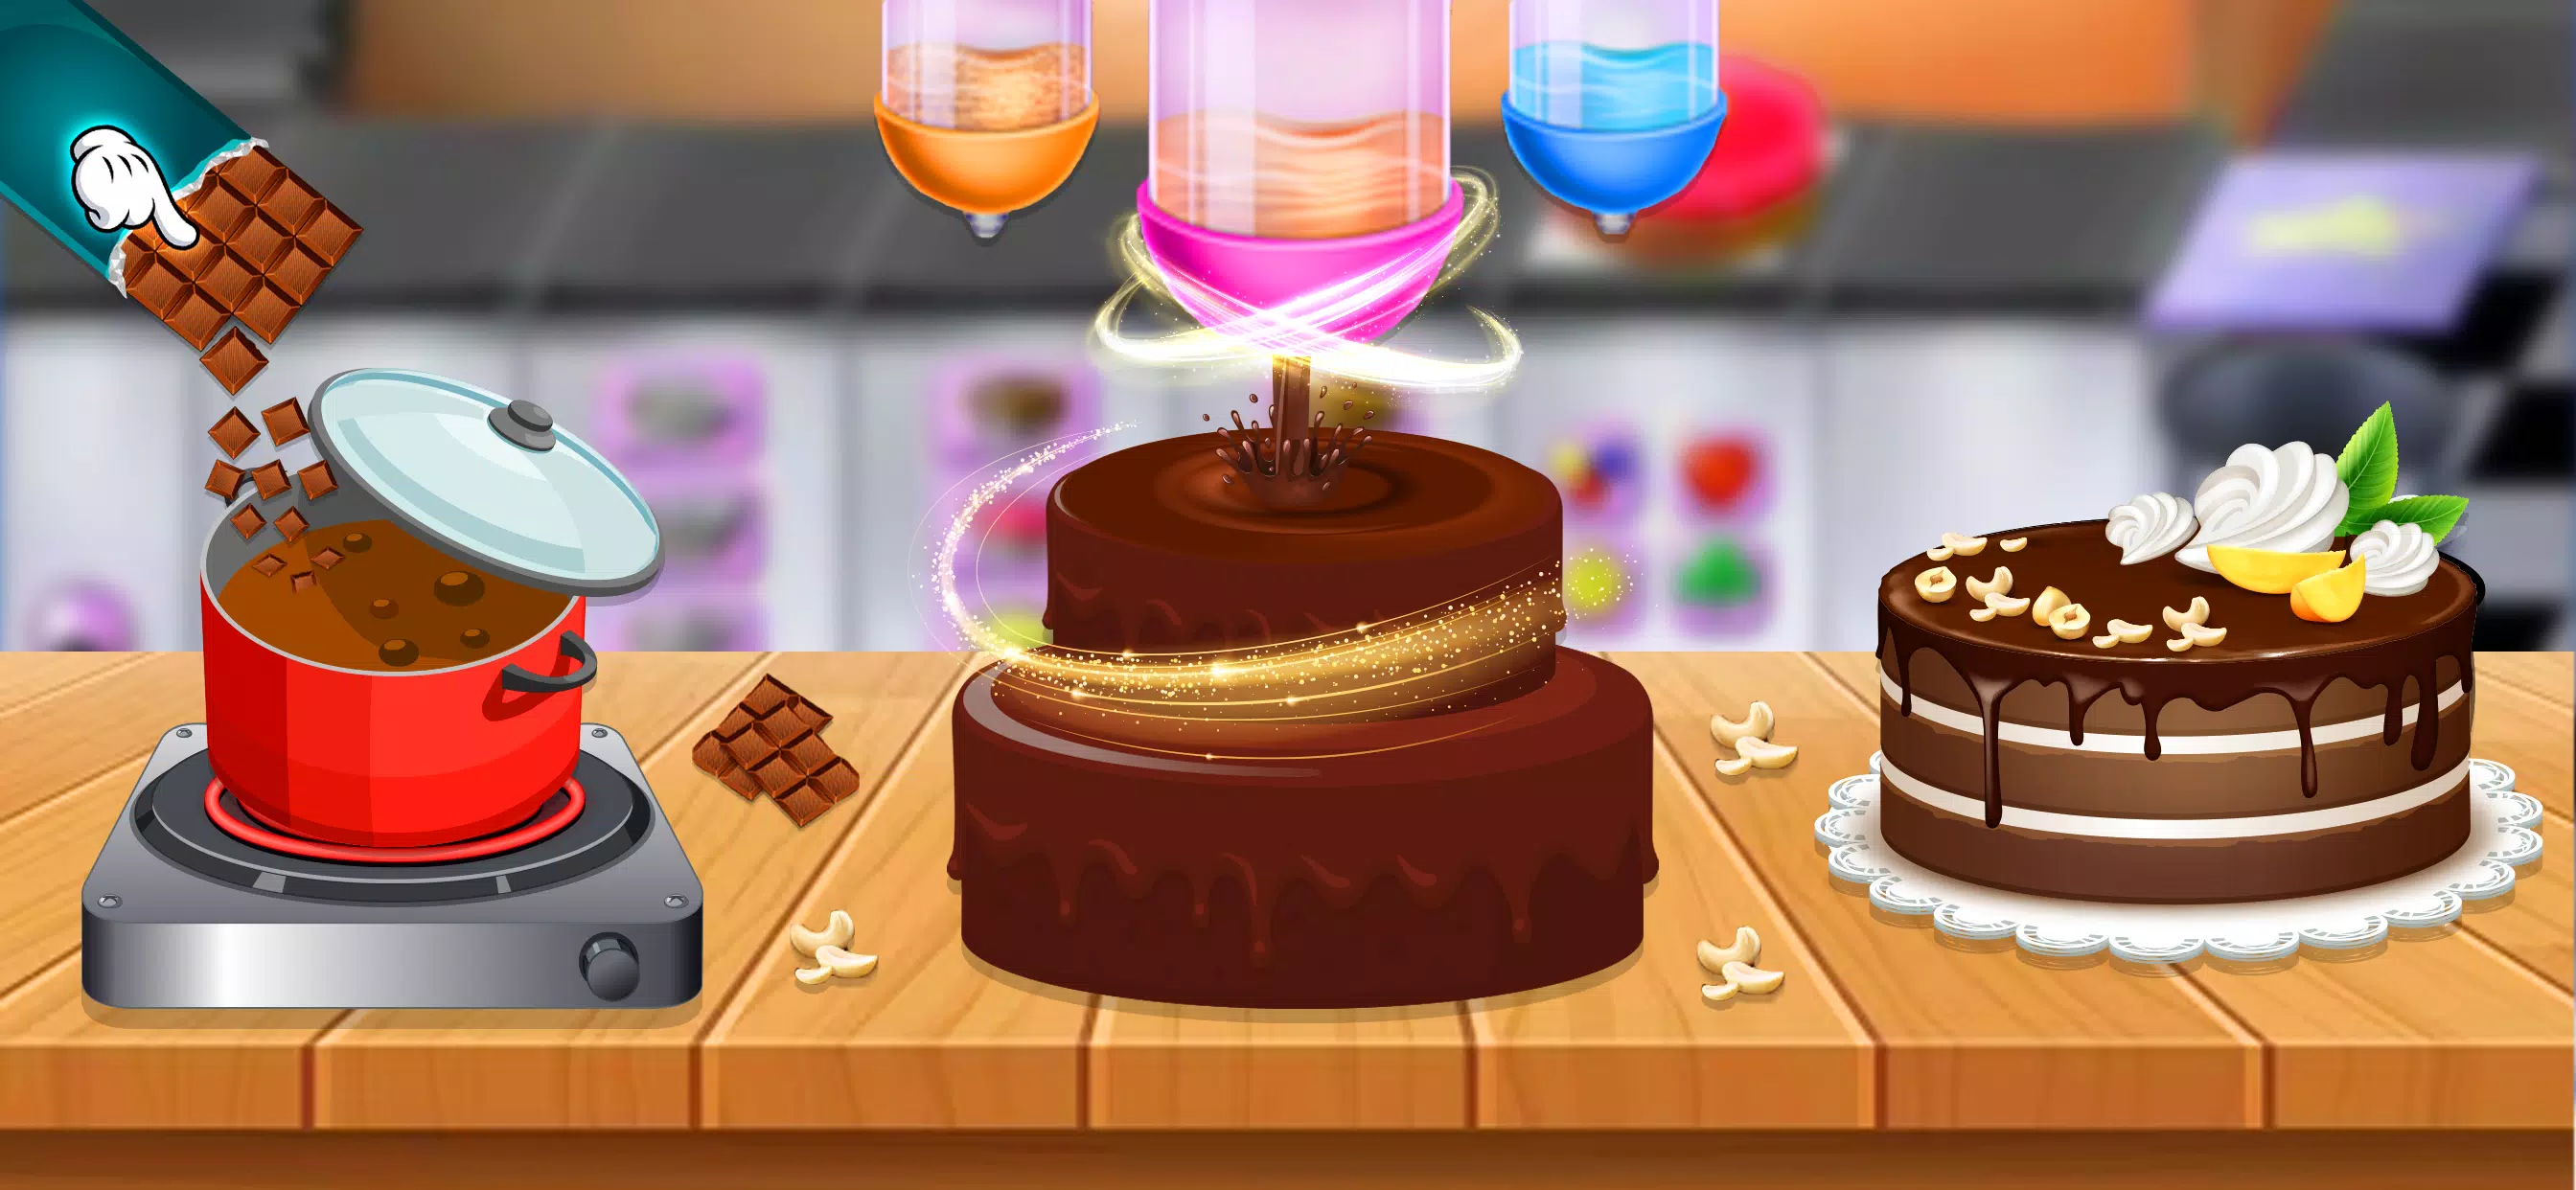 Cake Maker Factory Game Android Gameplay #2